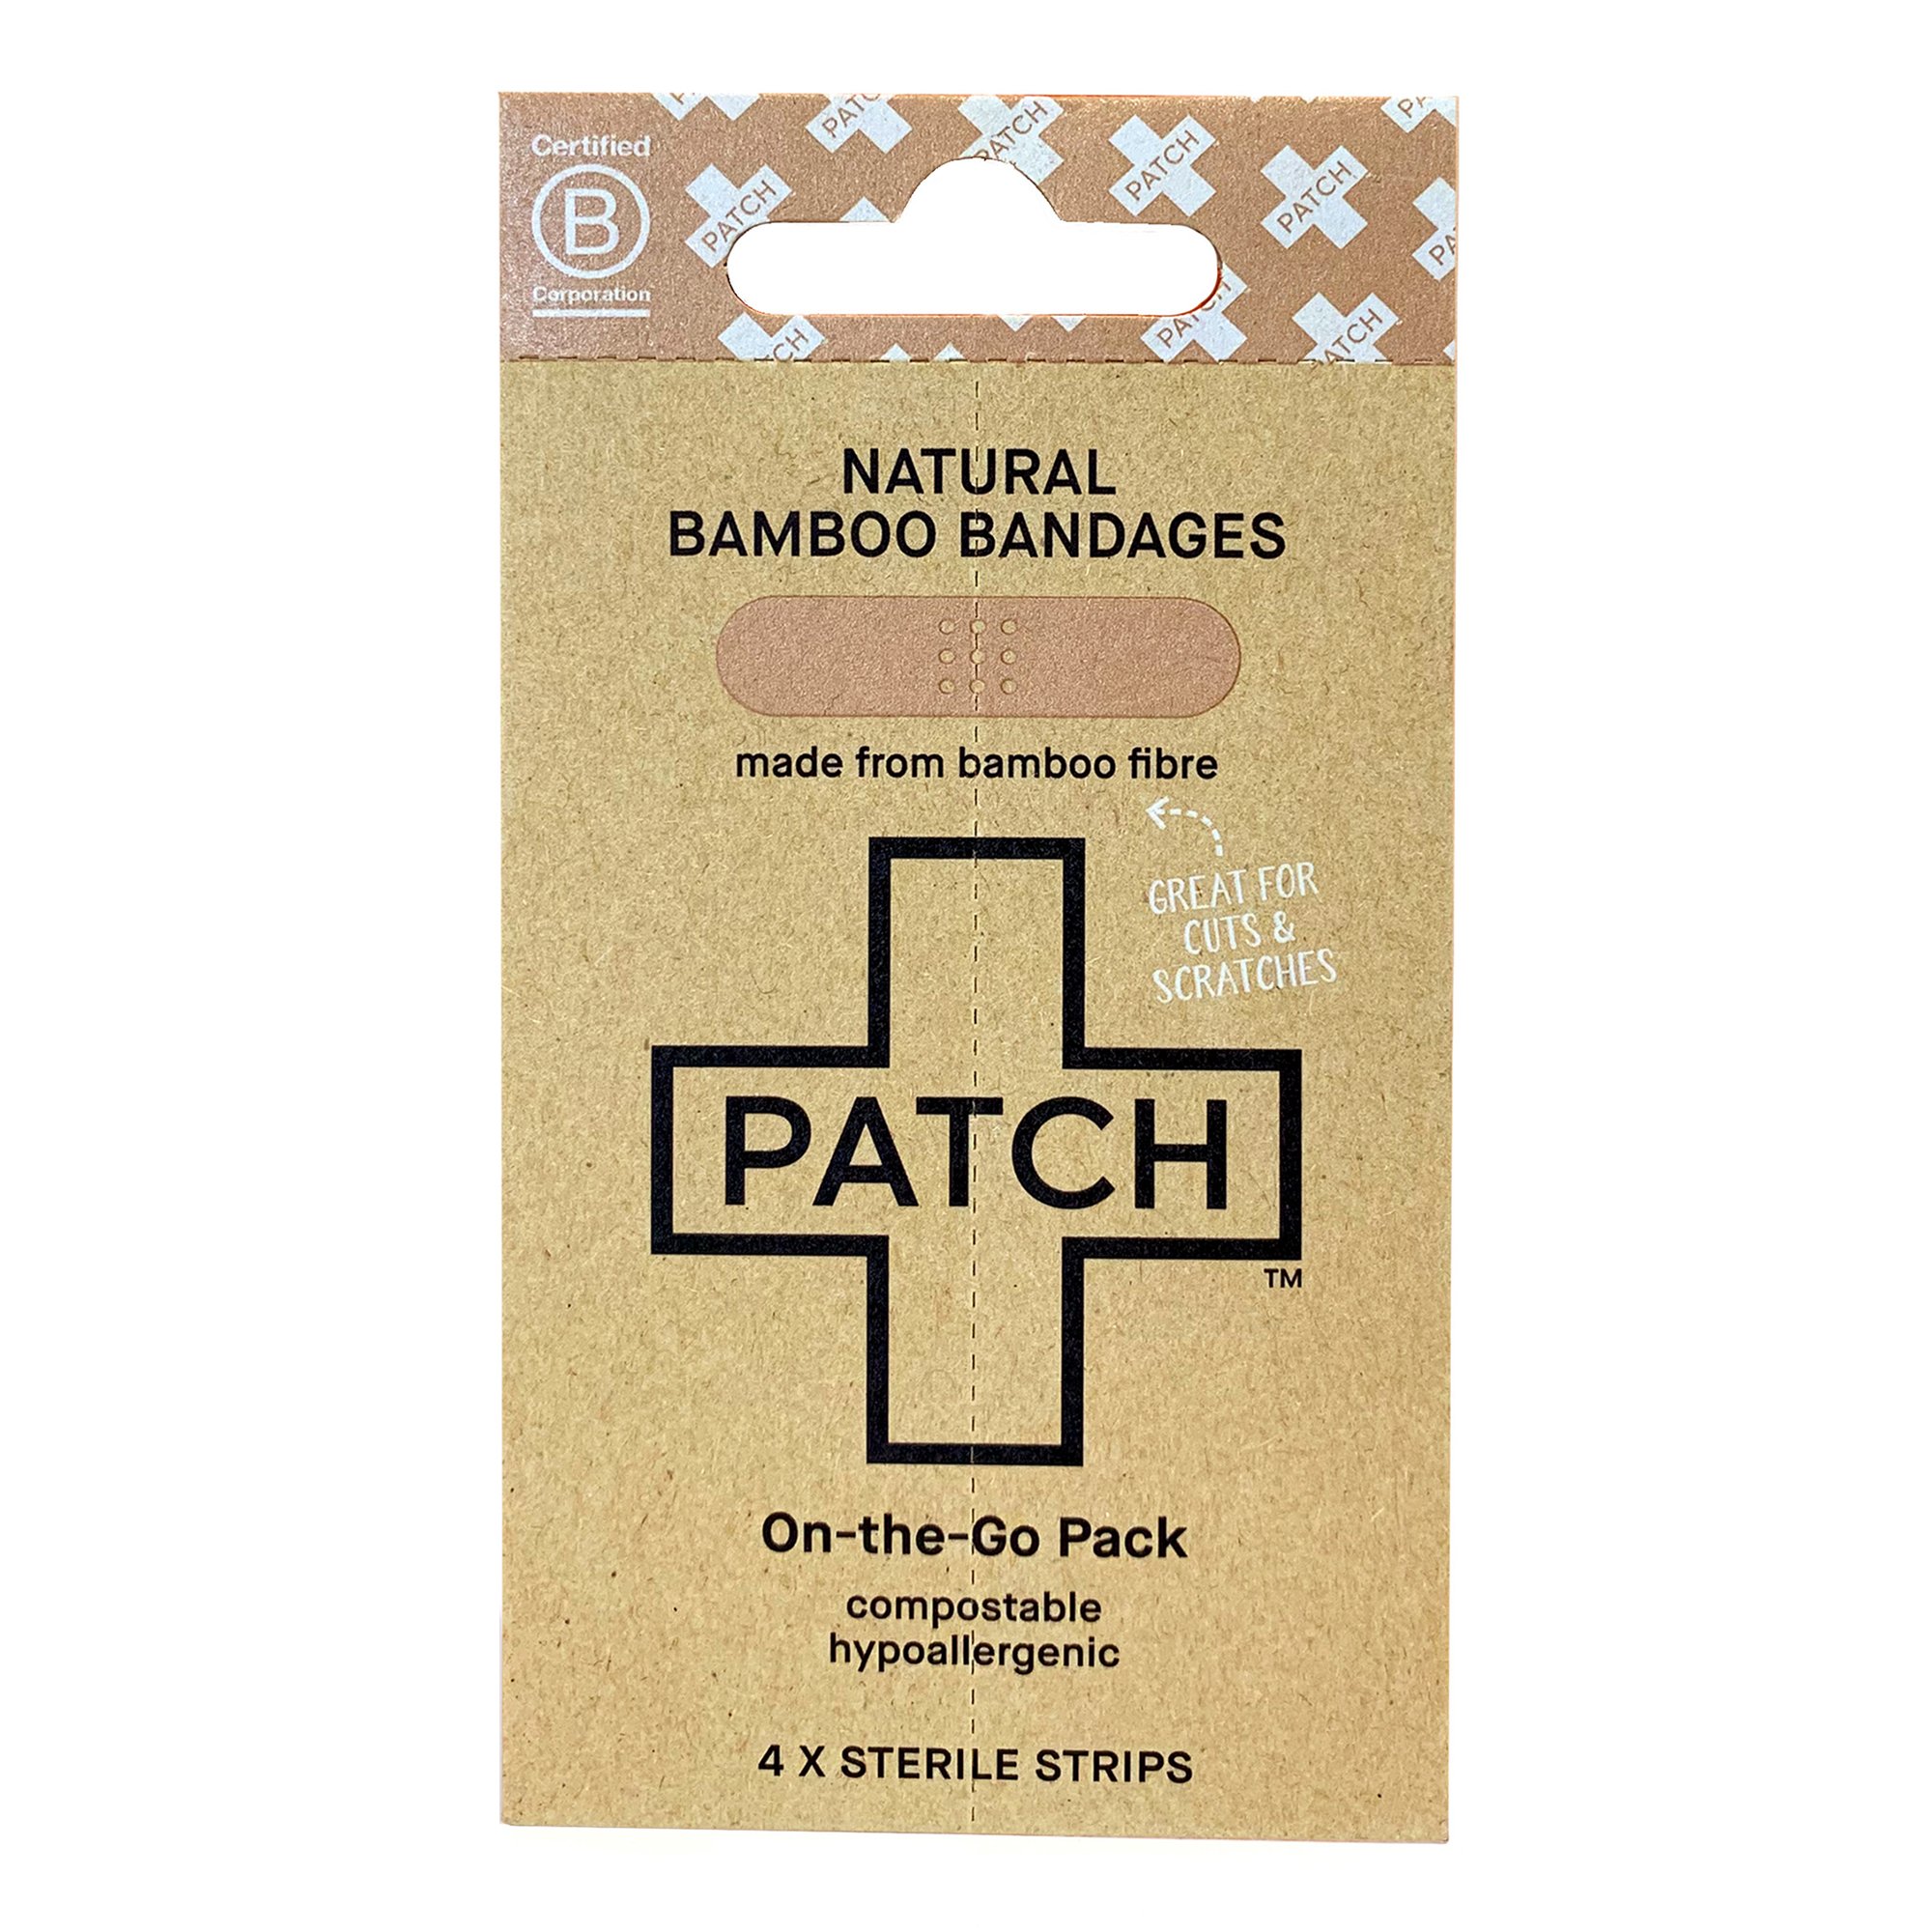 PATCH Eco First-Aid Kit containing hypoallergenic bandages for